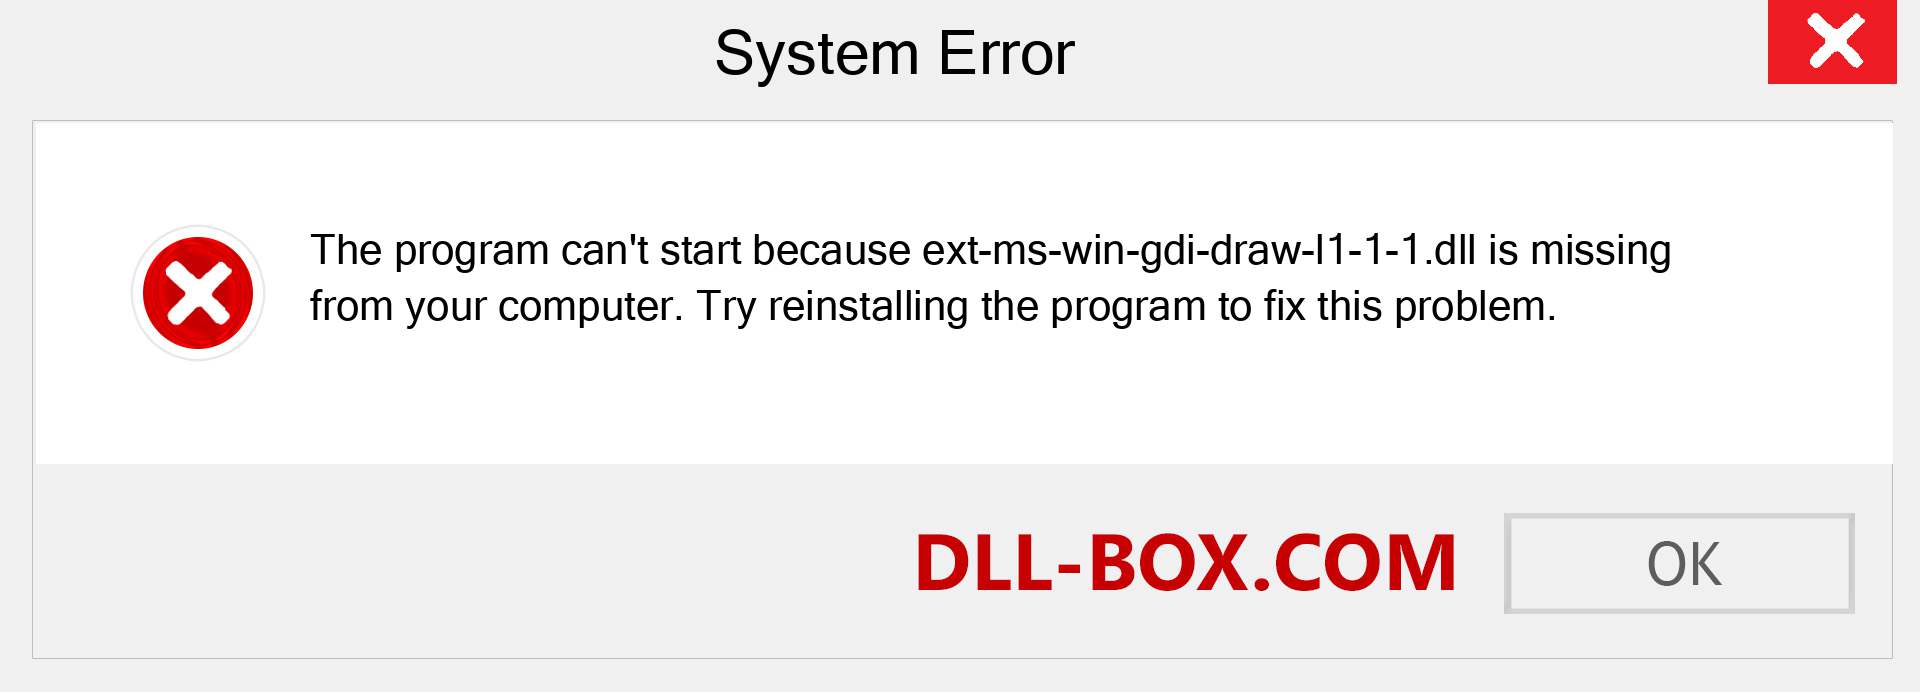  ext-ms-win-gdi-draw-l1-1-1.dll file is missing?. Download for Windows 7, 8, 10 - Fix  ext-ms-win-gdi-draw-l1-1-1 dll Missing Error on Windows, photos, images